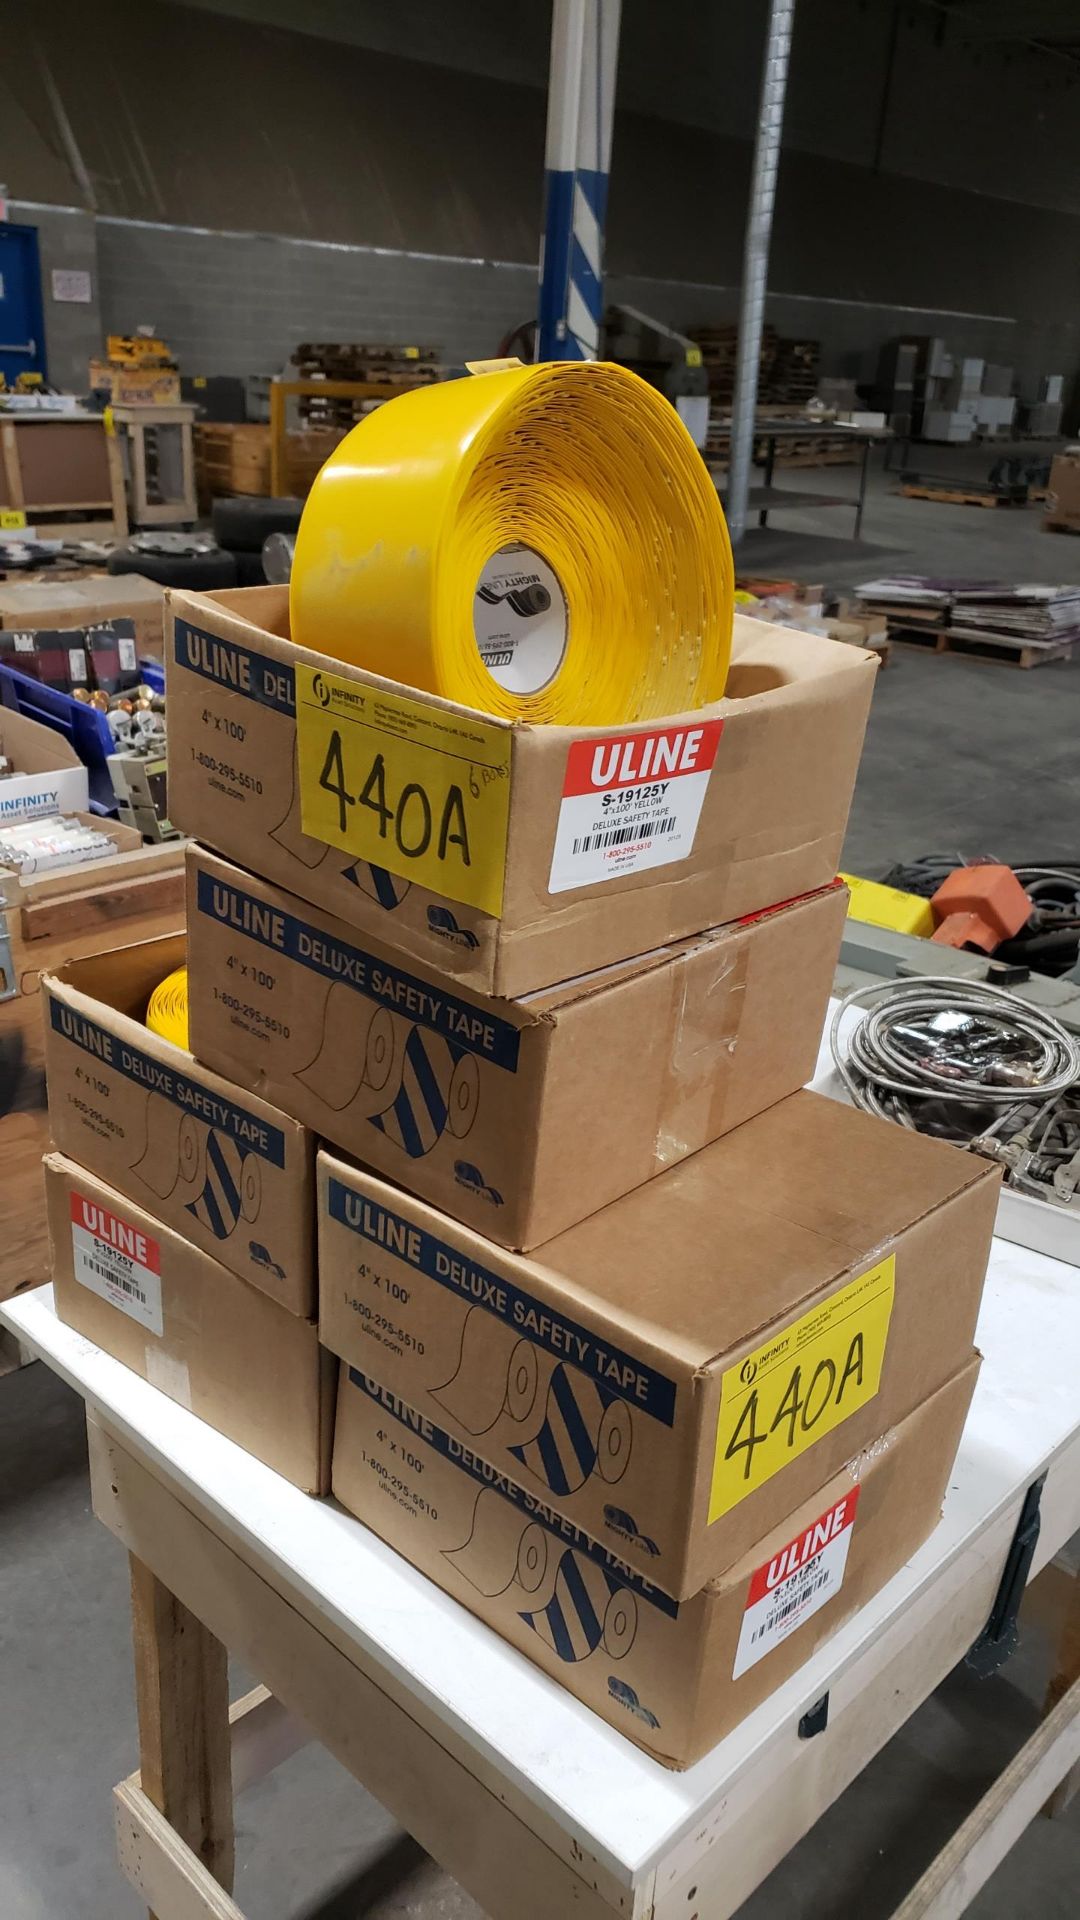 LOT - ULINE S-19125Y 4" X 100' YELLOW DELUXE SAFETY TAPE - Image 3 of 4